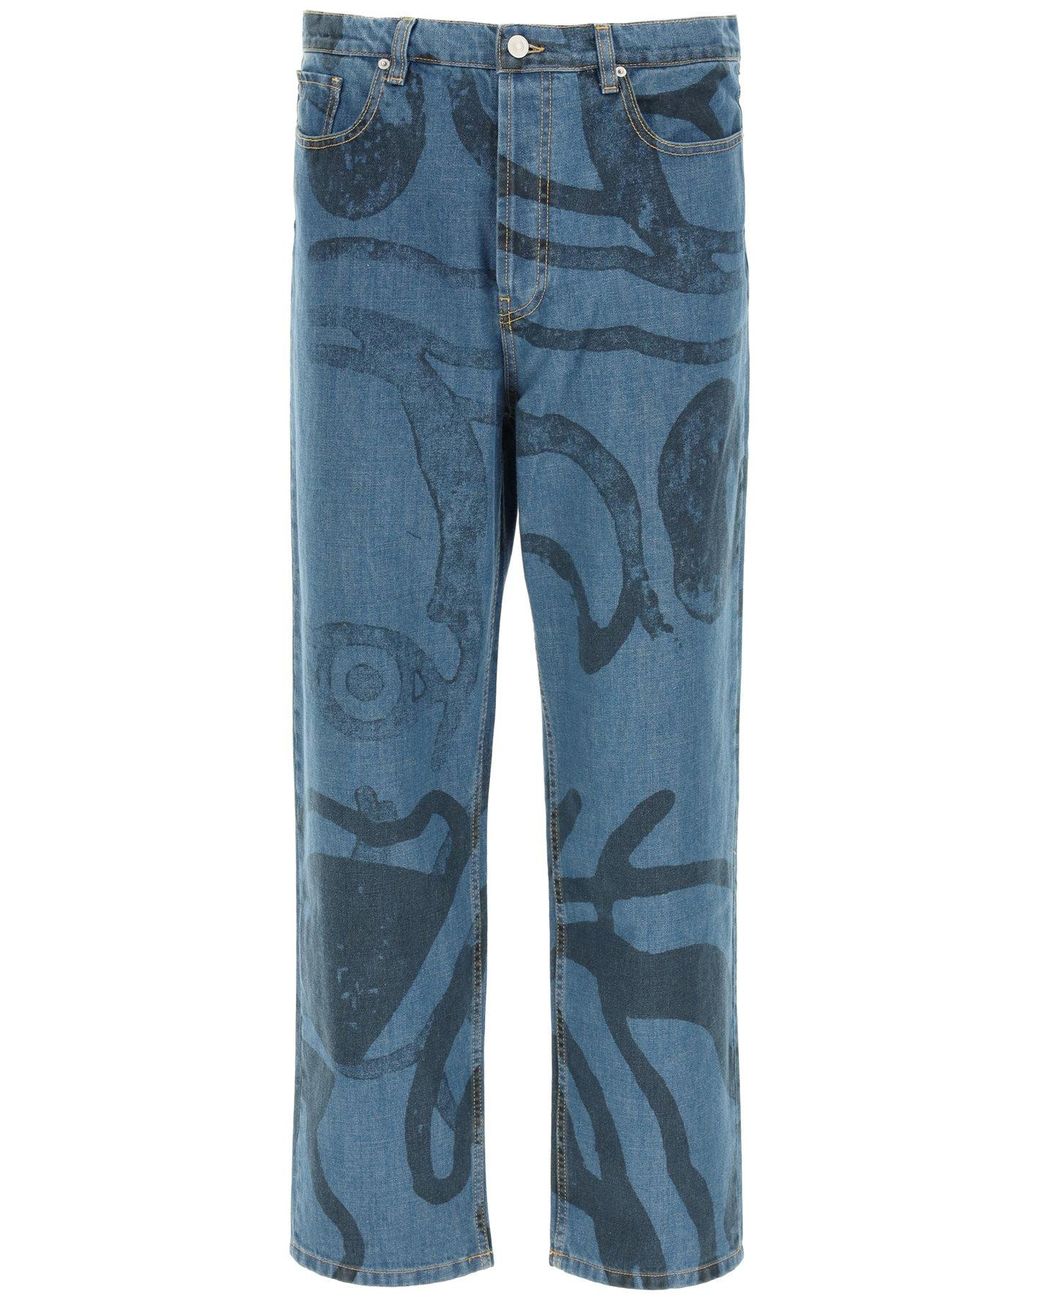 KENZO Denim Large Jeans With K-tiger Print in Blue for Men - Lyst